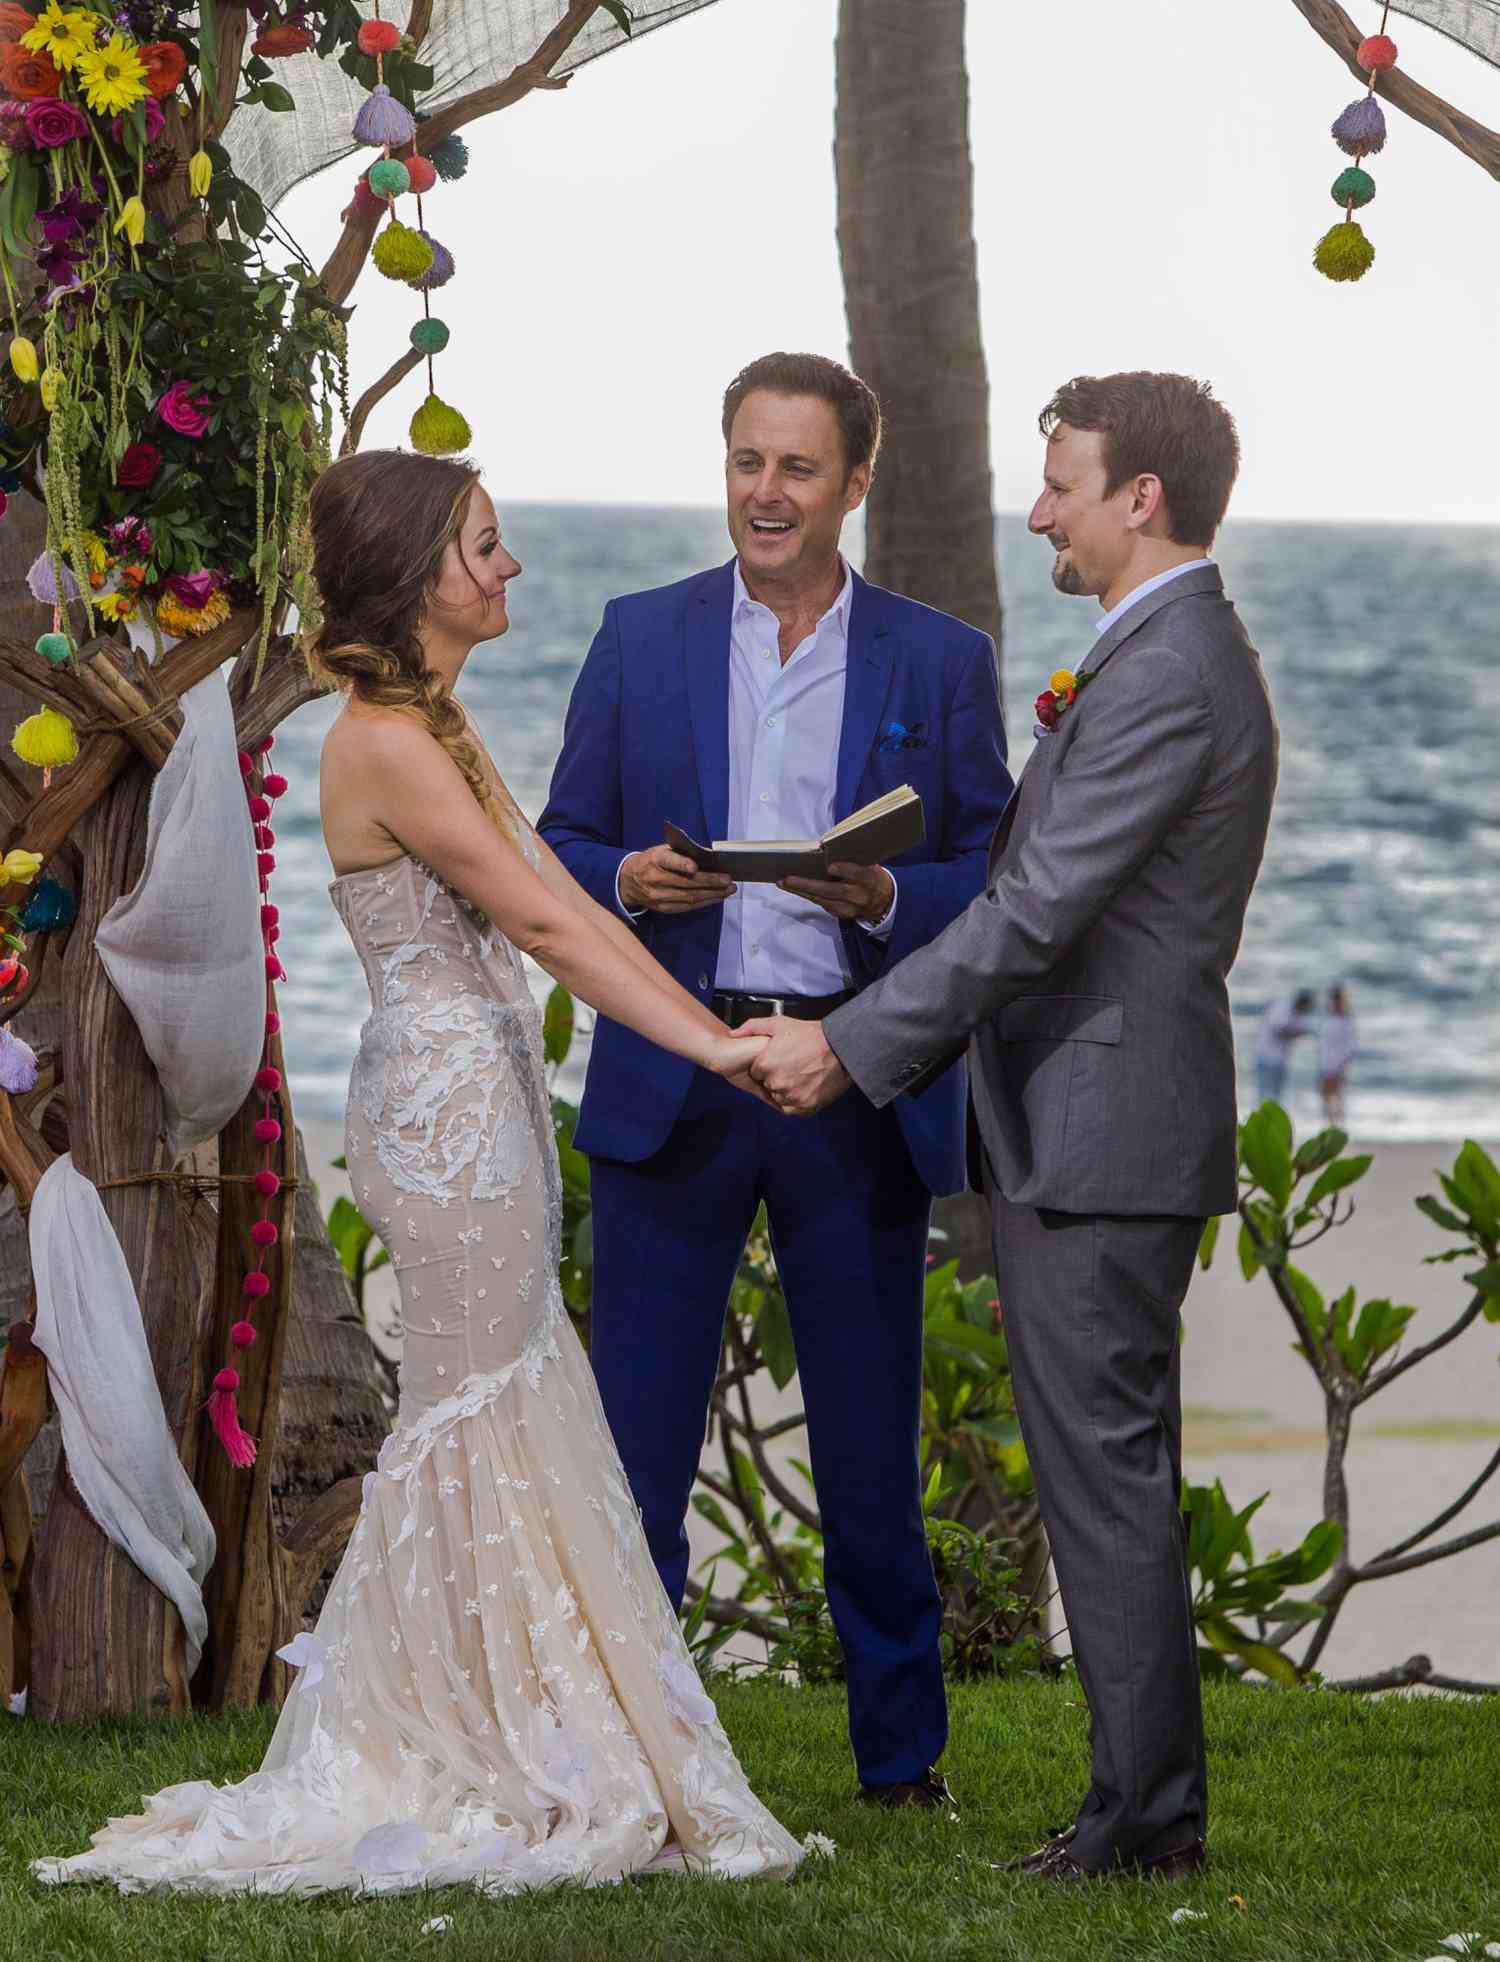 All About Bachelor In Paradise Star Carly Waddell's Wedding Dress |  PEOPLE.com